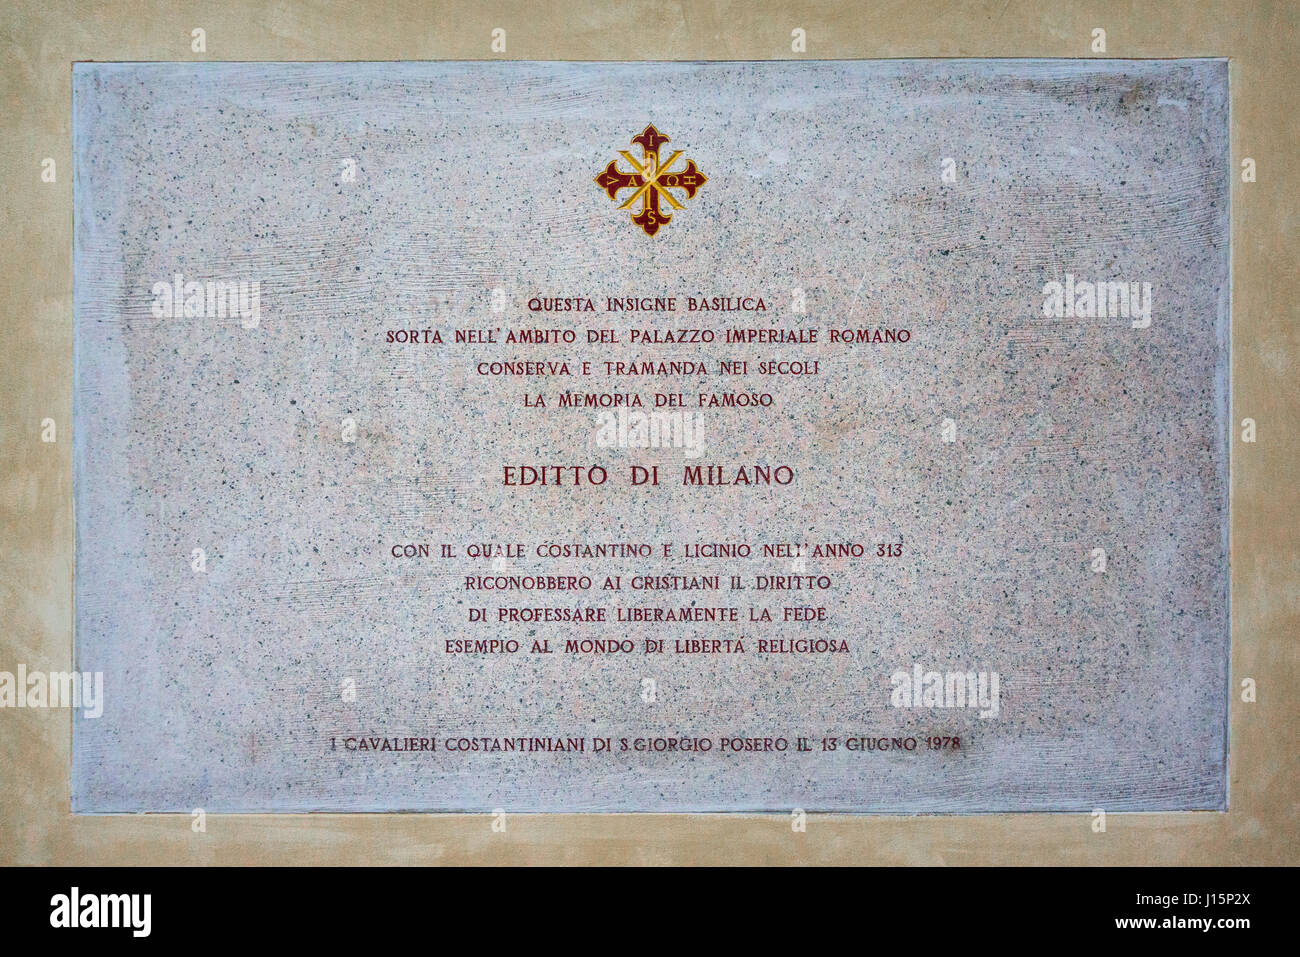 Remembering the Edict of Milan (AD 313) which made all religions legal within the Roman Empire - St George Church - Milan Stock Photo